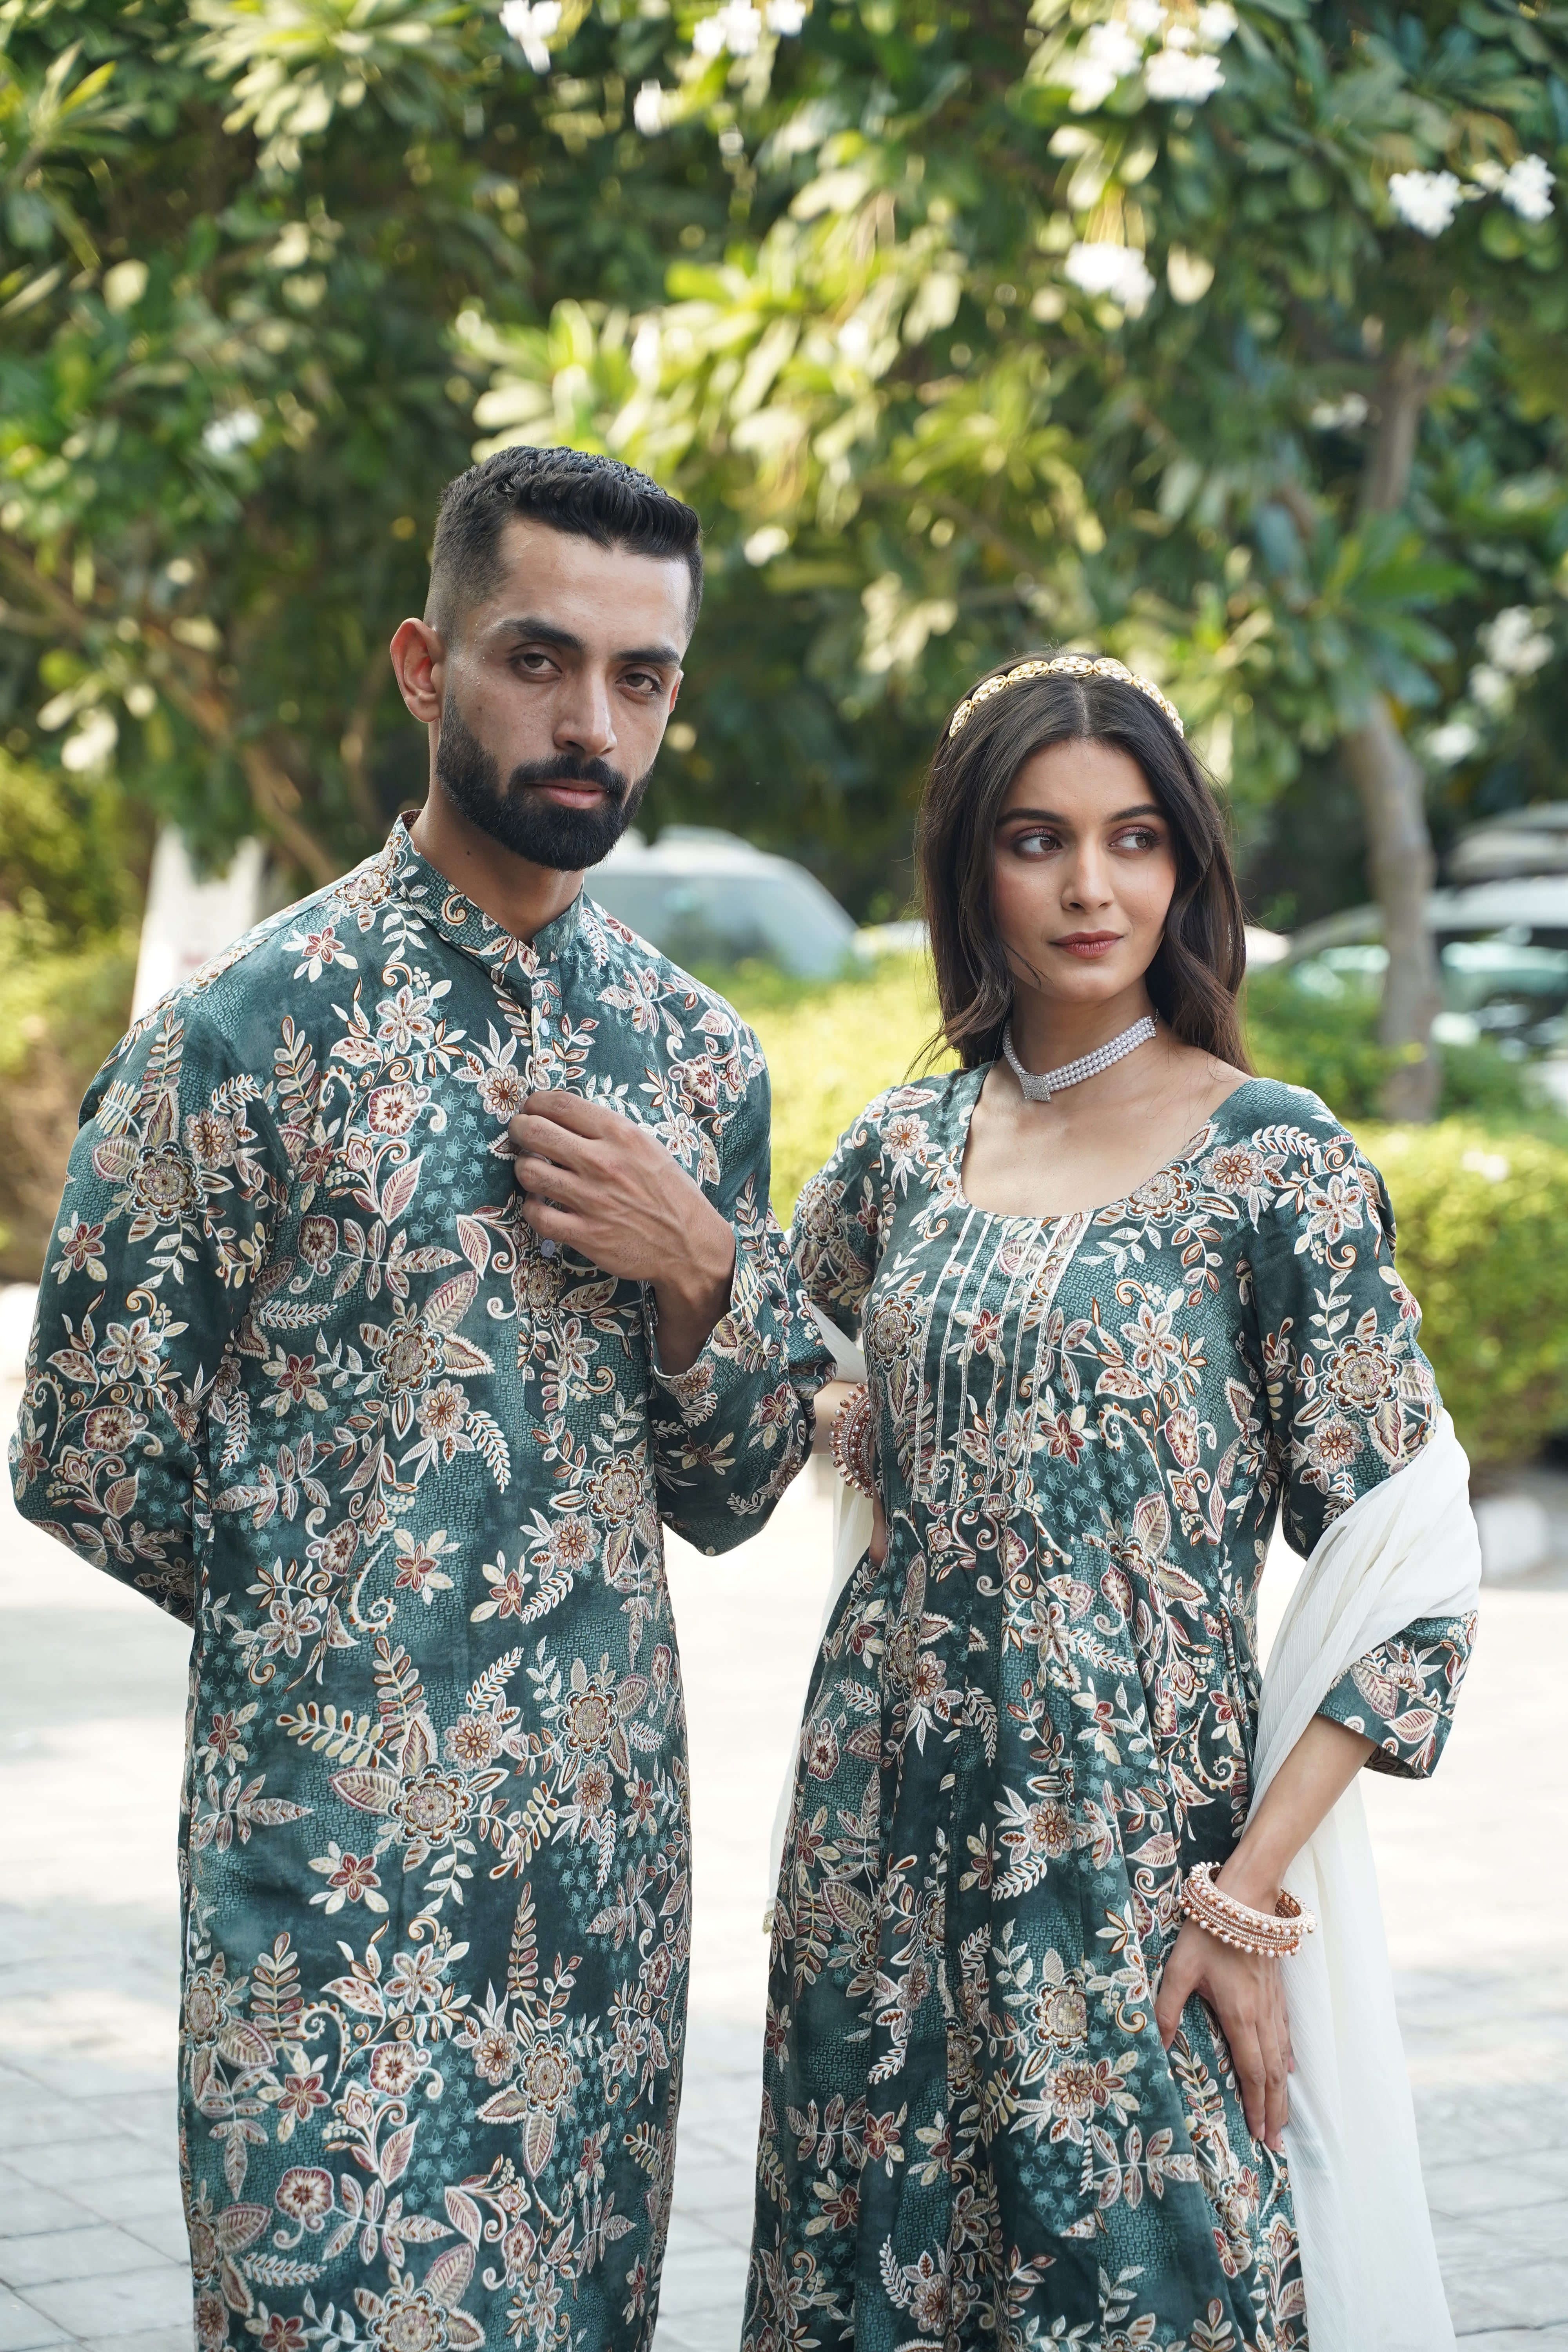 Couple matching Outfit | Indian wedding reception outfits, Wedding matching  outfits, Couple matching outfits